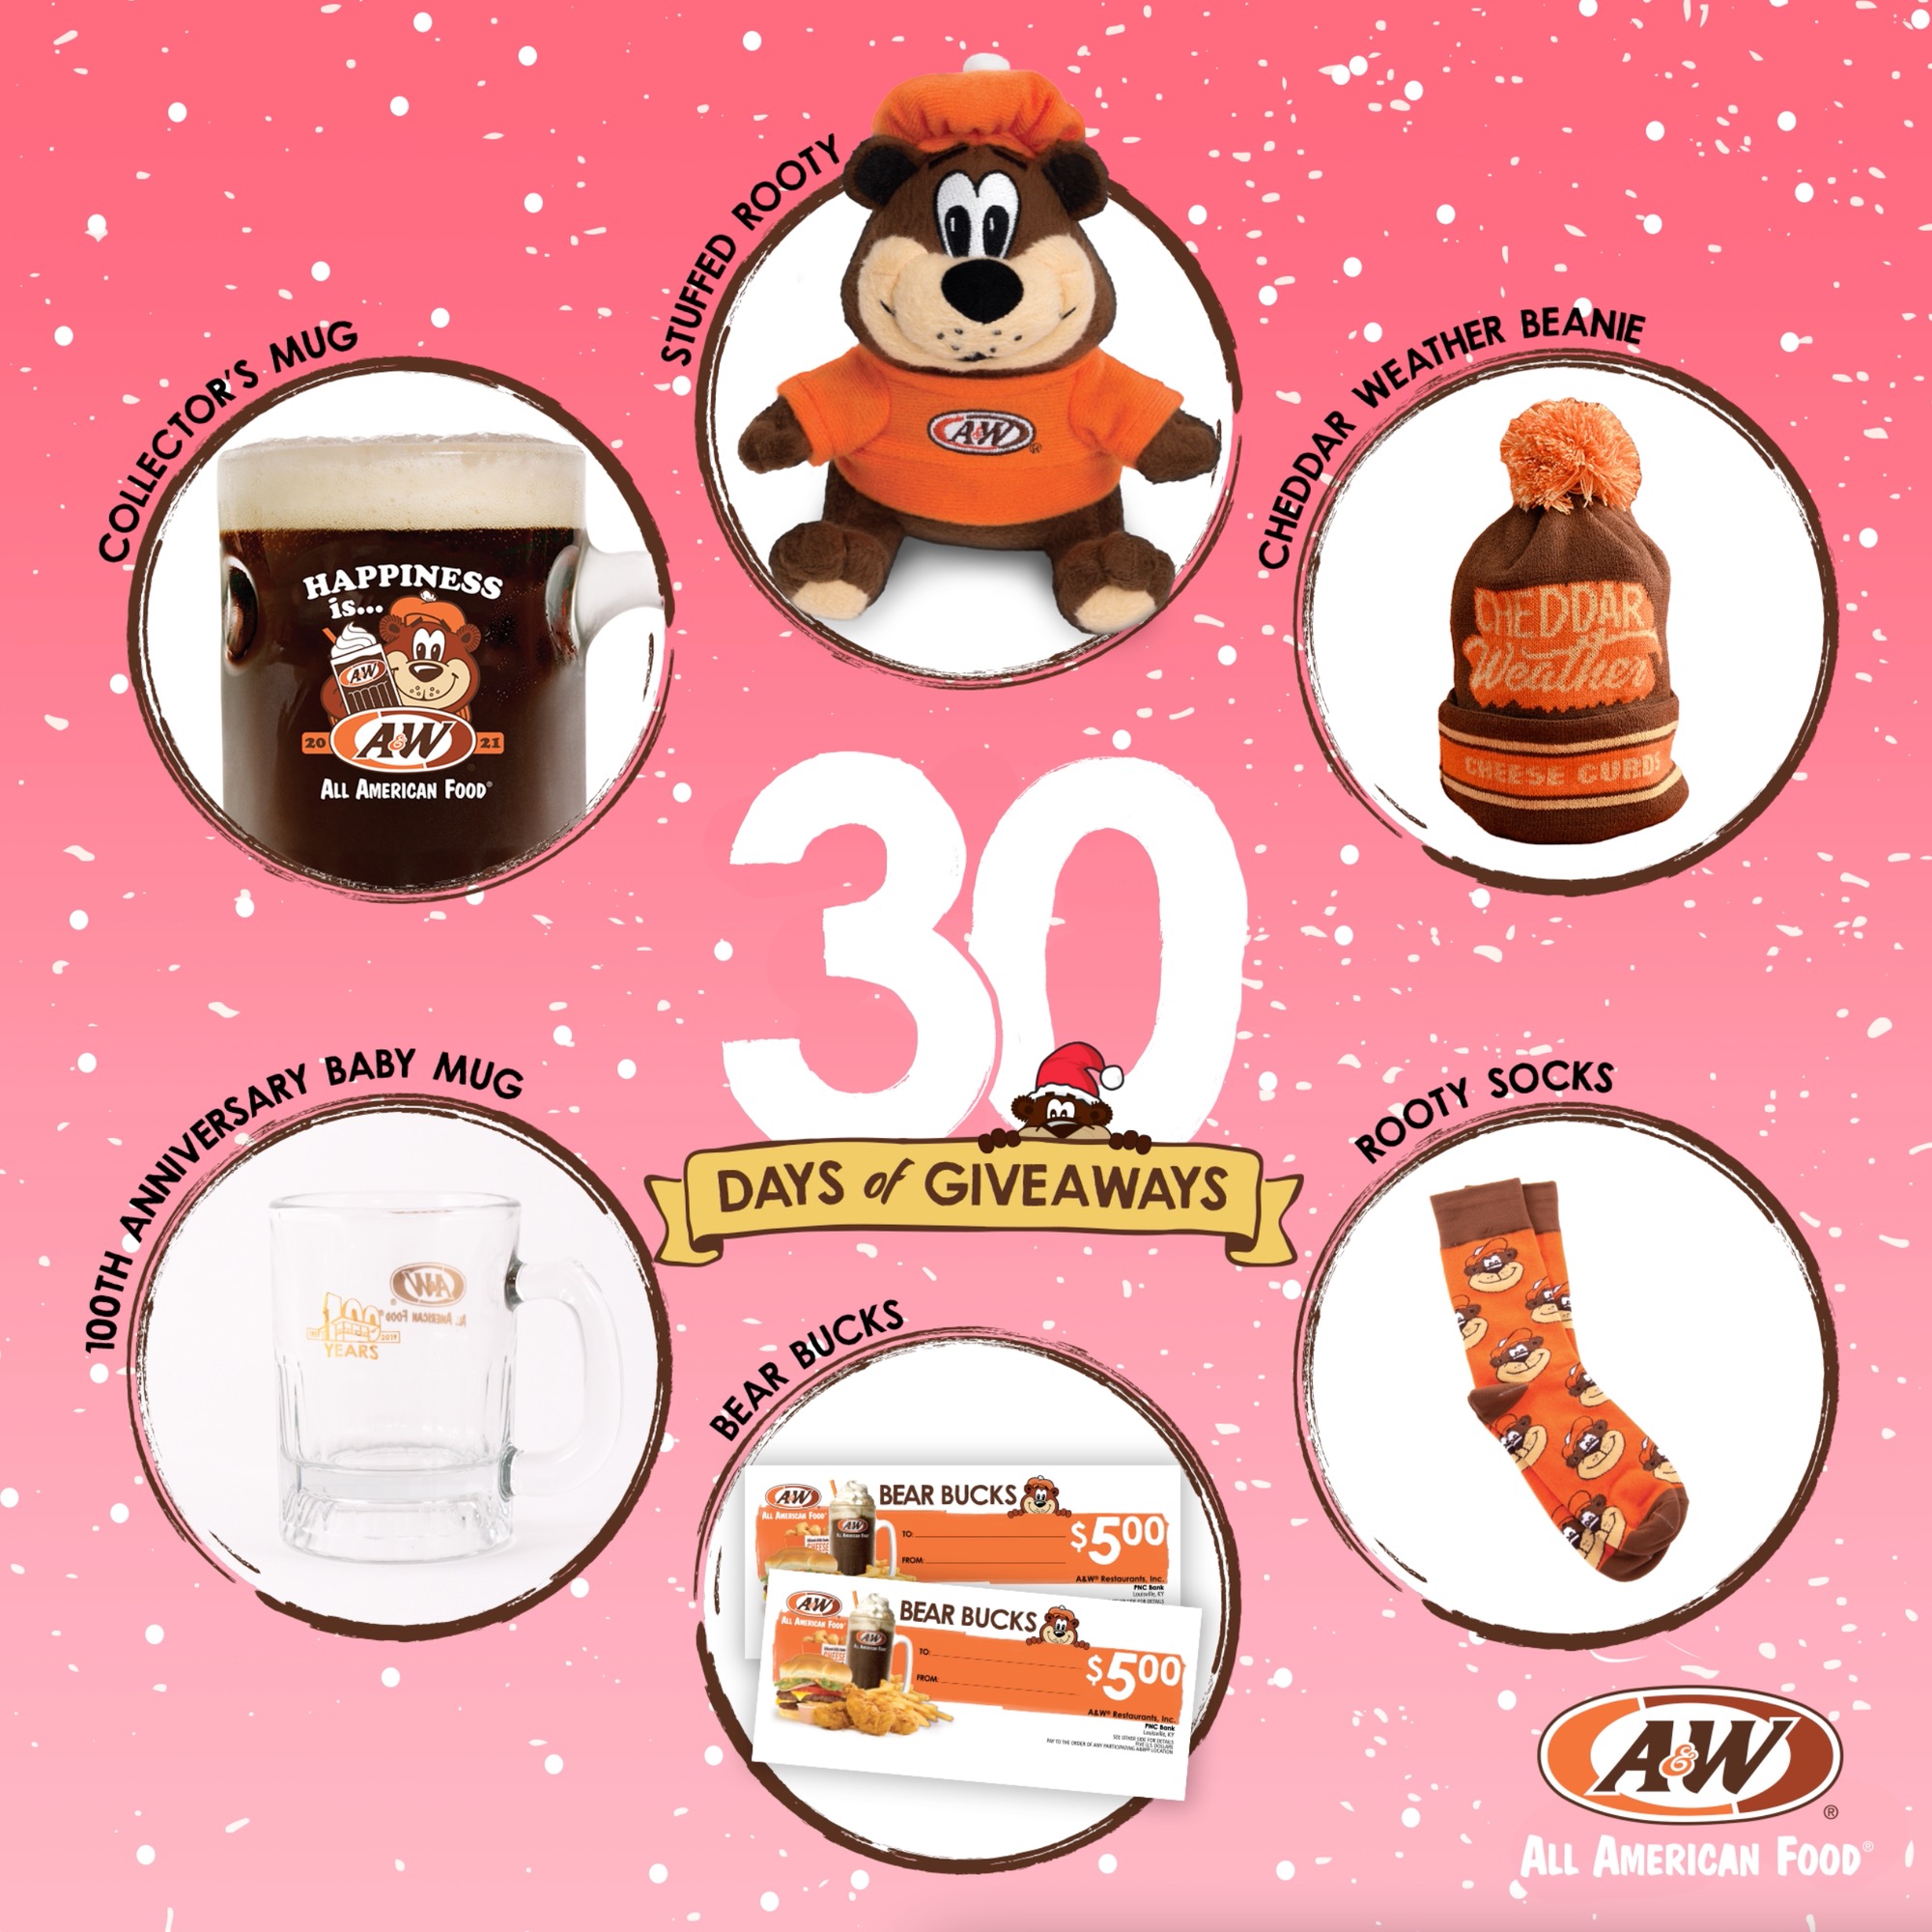 30 Days of Giveaways Prize Pack Three featuring Stuffed Rooty, 100th Anniversary Baby Mug, Bear Bucks, Collector's Mug, Rooty Socks, and Cheddar Weather Beanie.